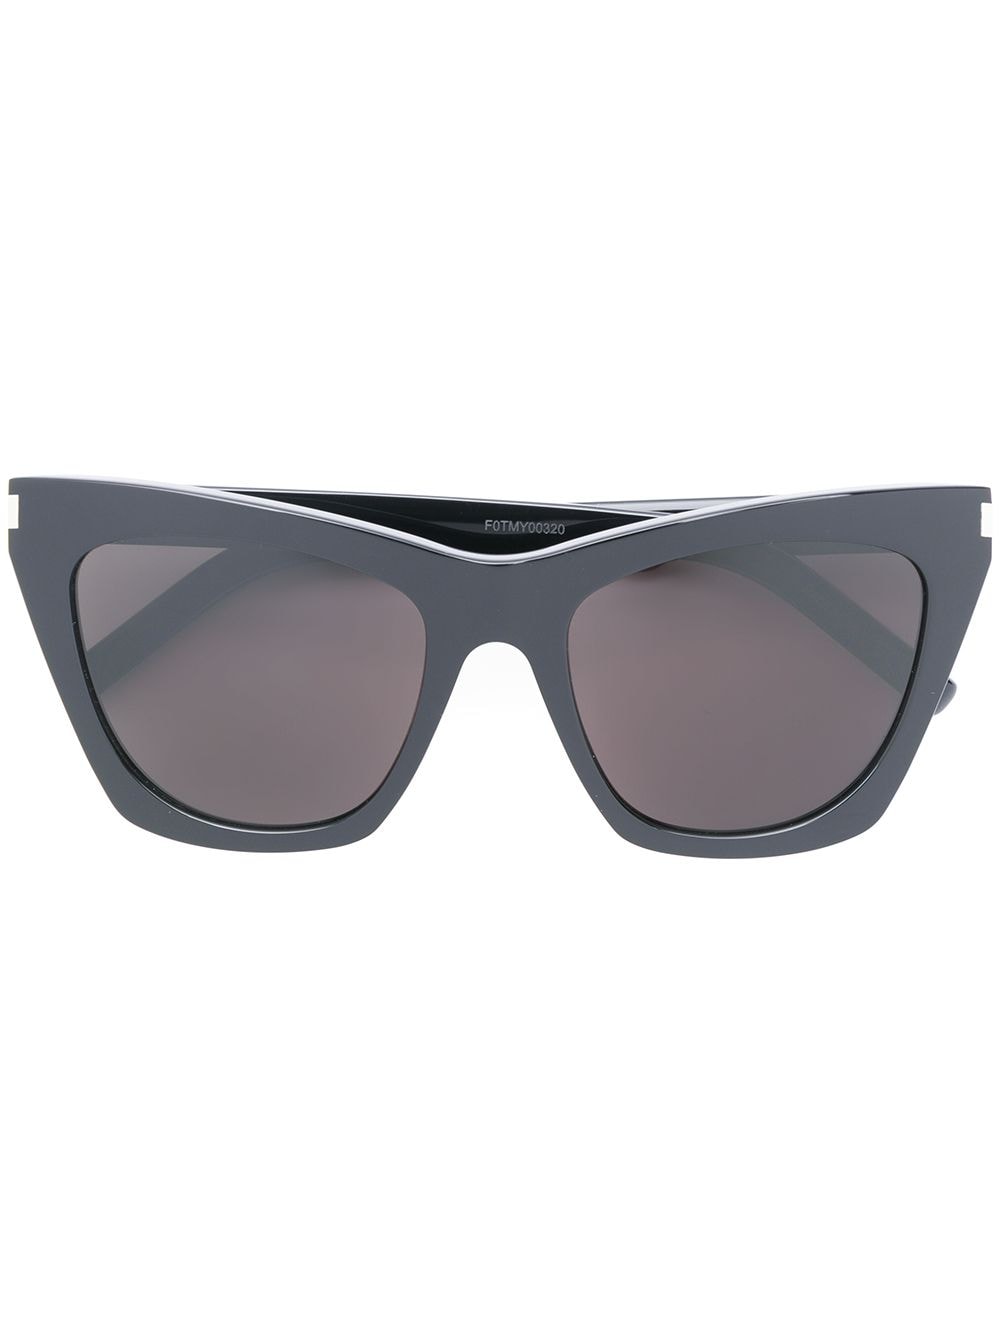 SAINT LAURENT Sleek and Chic Acetate Sunglasses in Black and Grey for Women